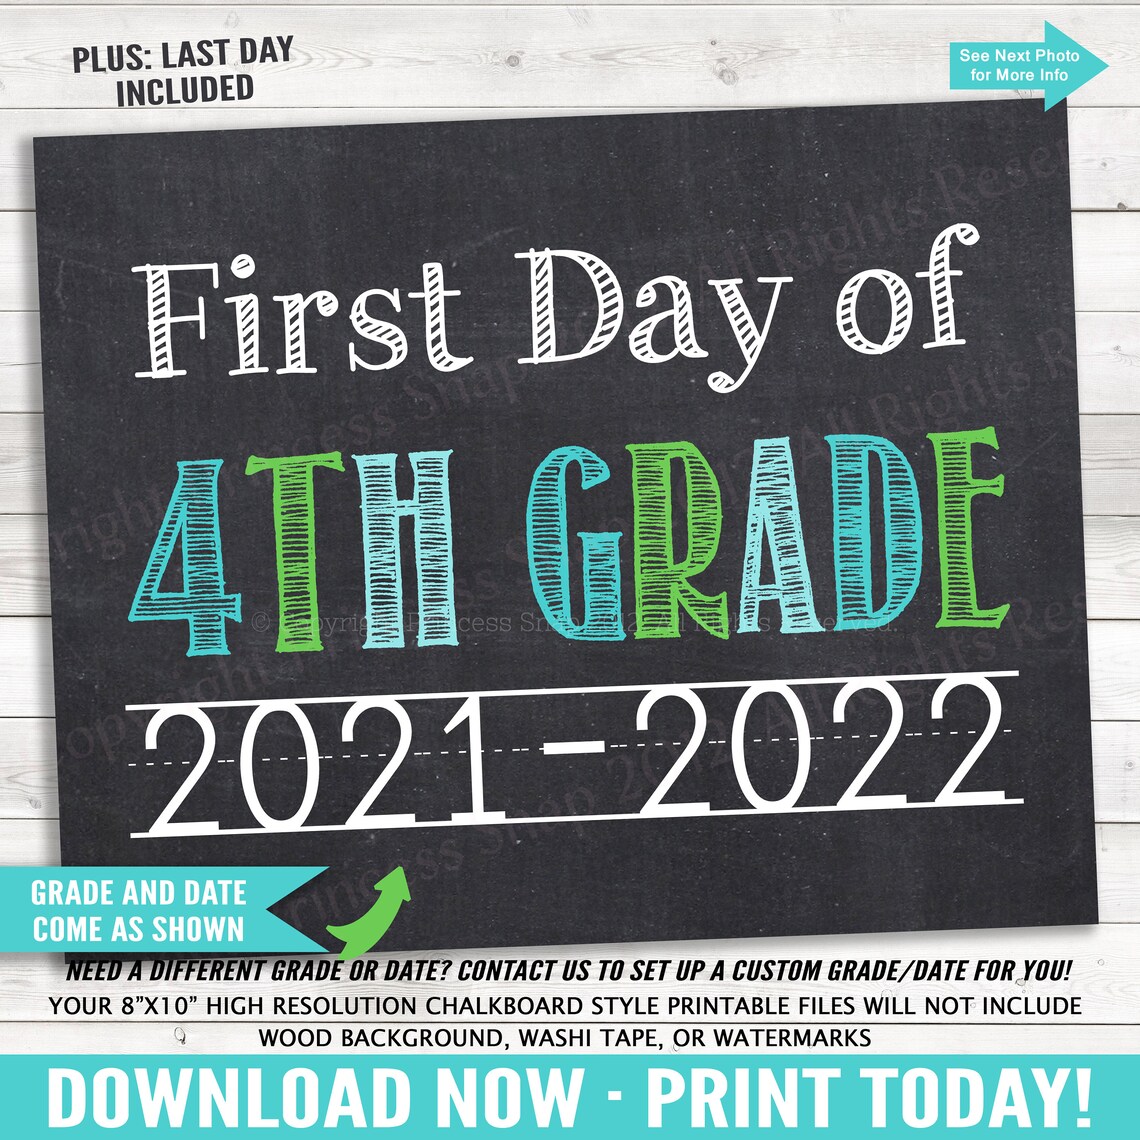 first-and-last-day-of-4th-grade-2021-2022-4th-grade-photo-etsy